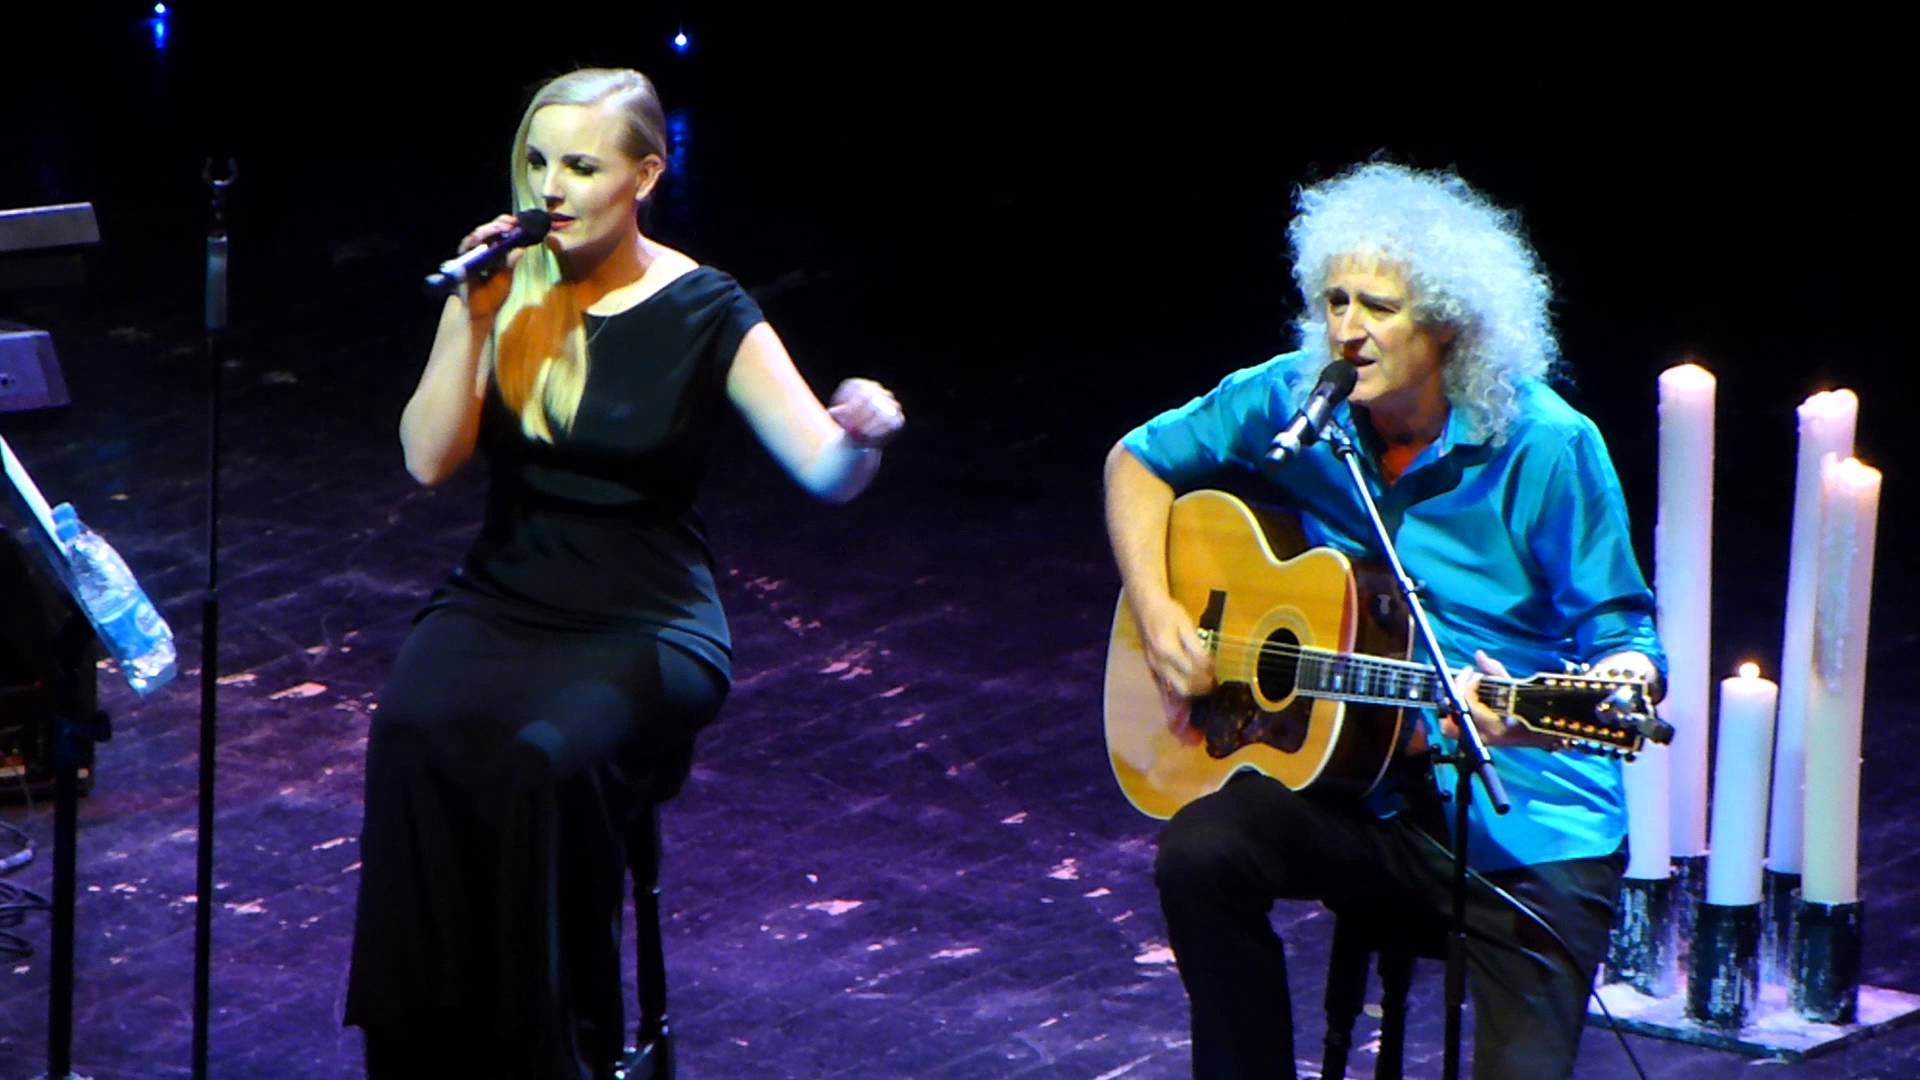 Brian and Kerry, Crocus City Hall, Moscow 16 March 2014